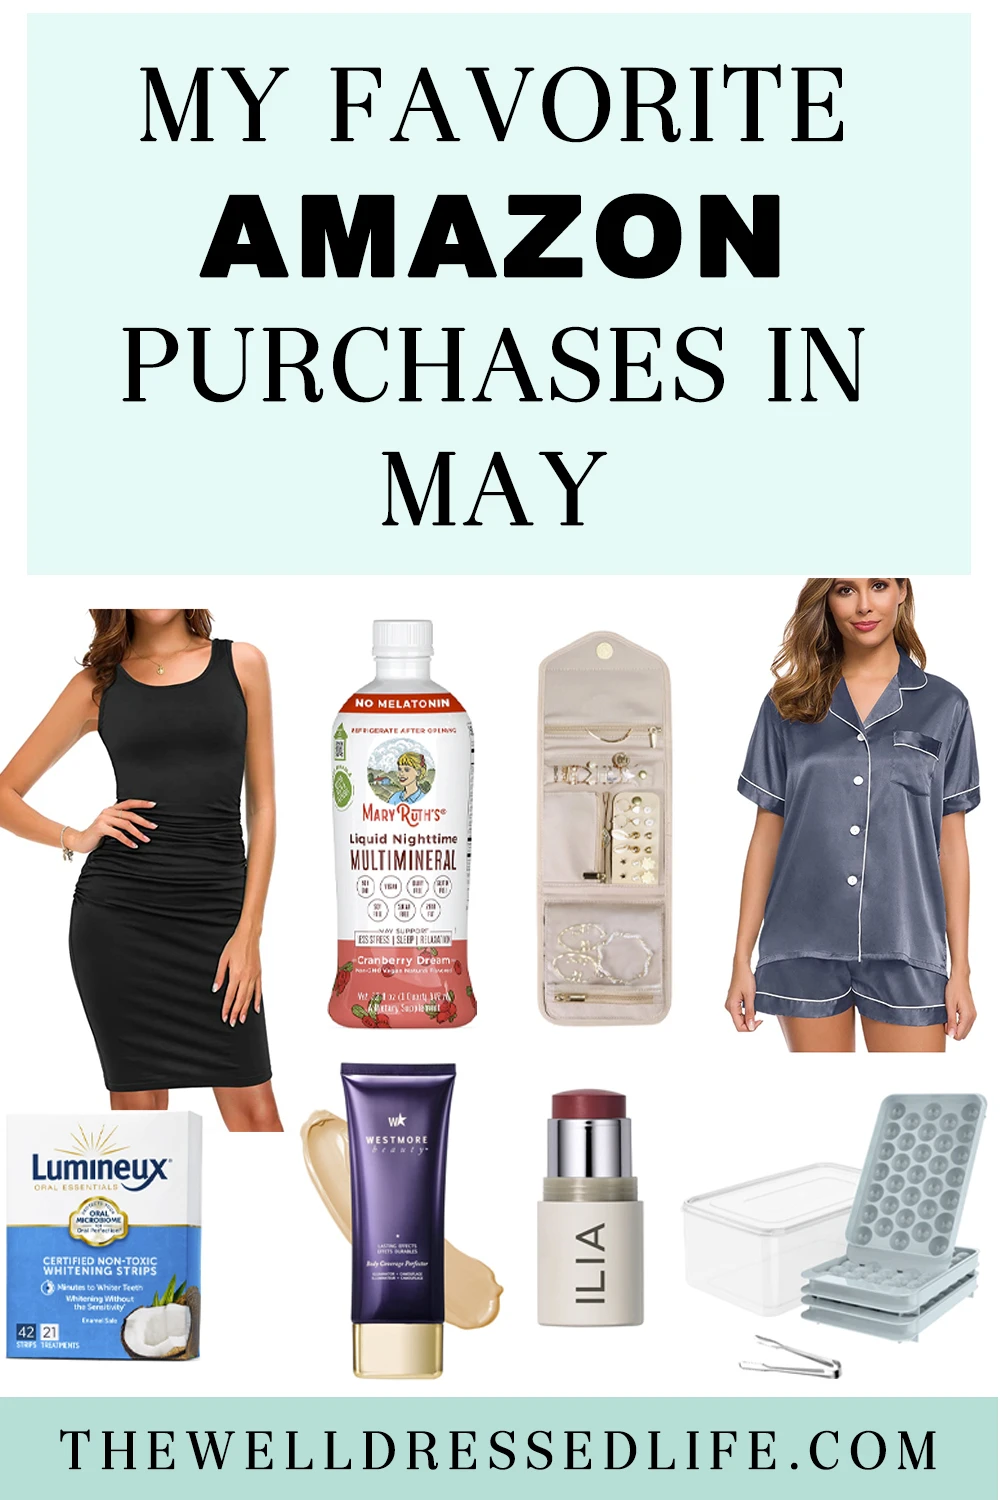 My Favorite Amazon Purchases in May